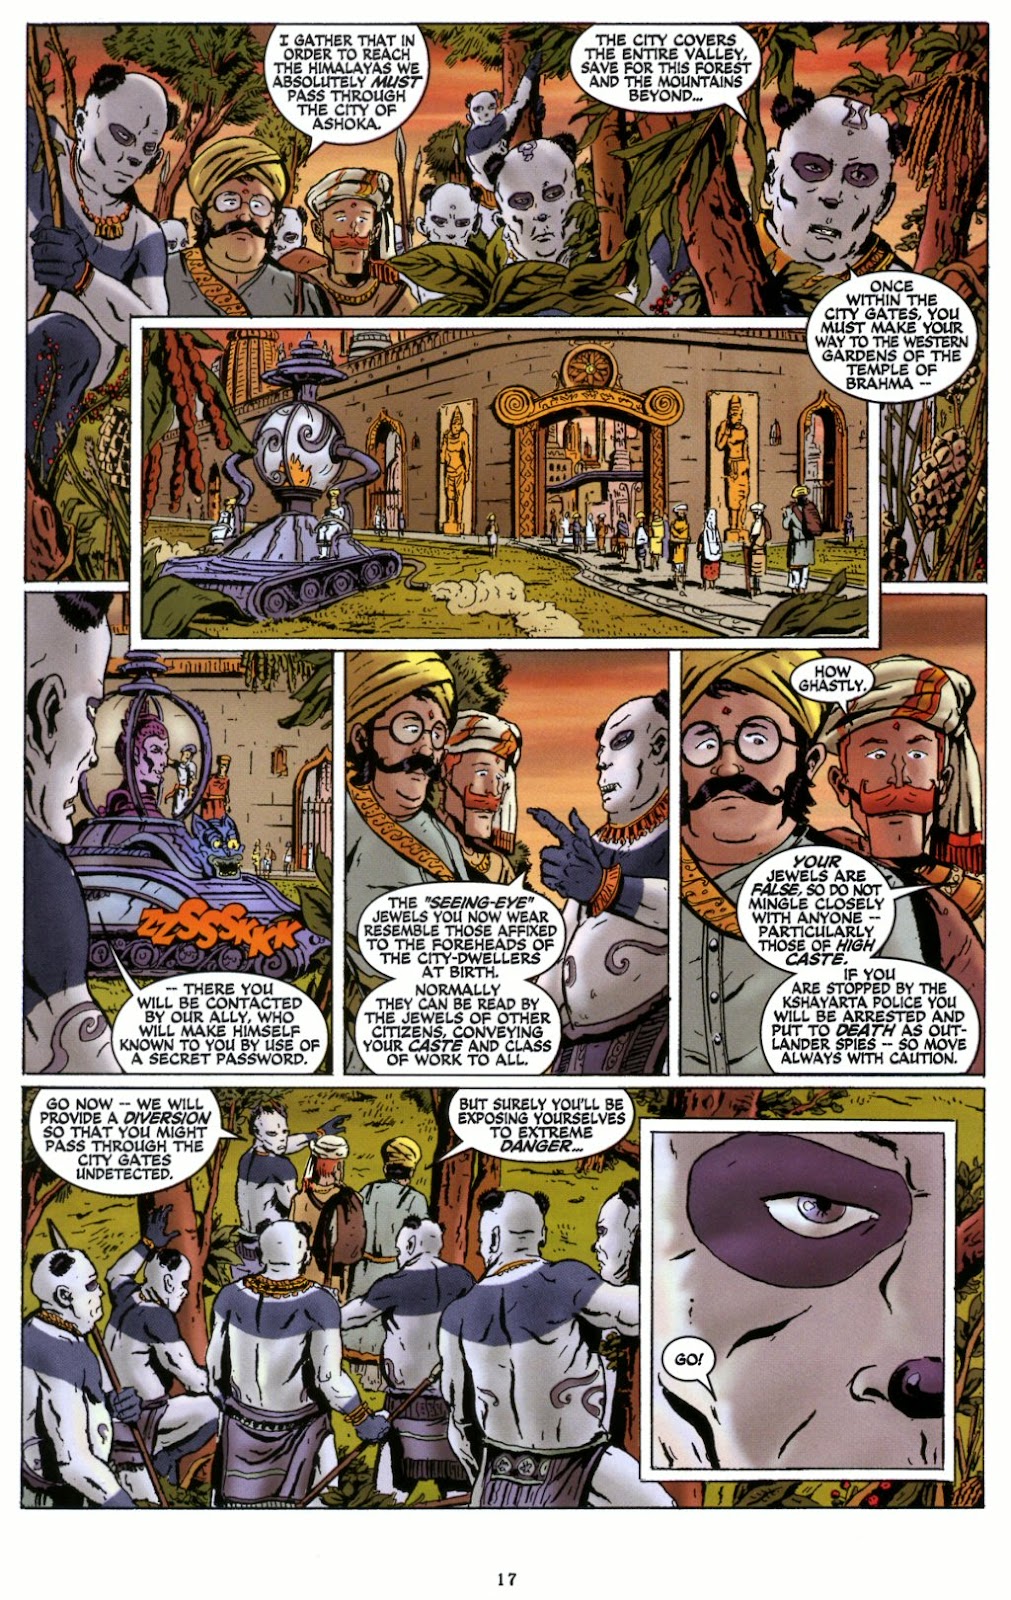 The Remarkable Worlds of Professor Phineas B. Fuddle issue 3 - Page 18